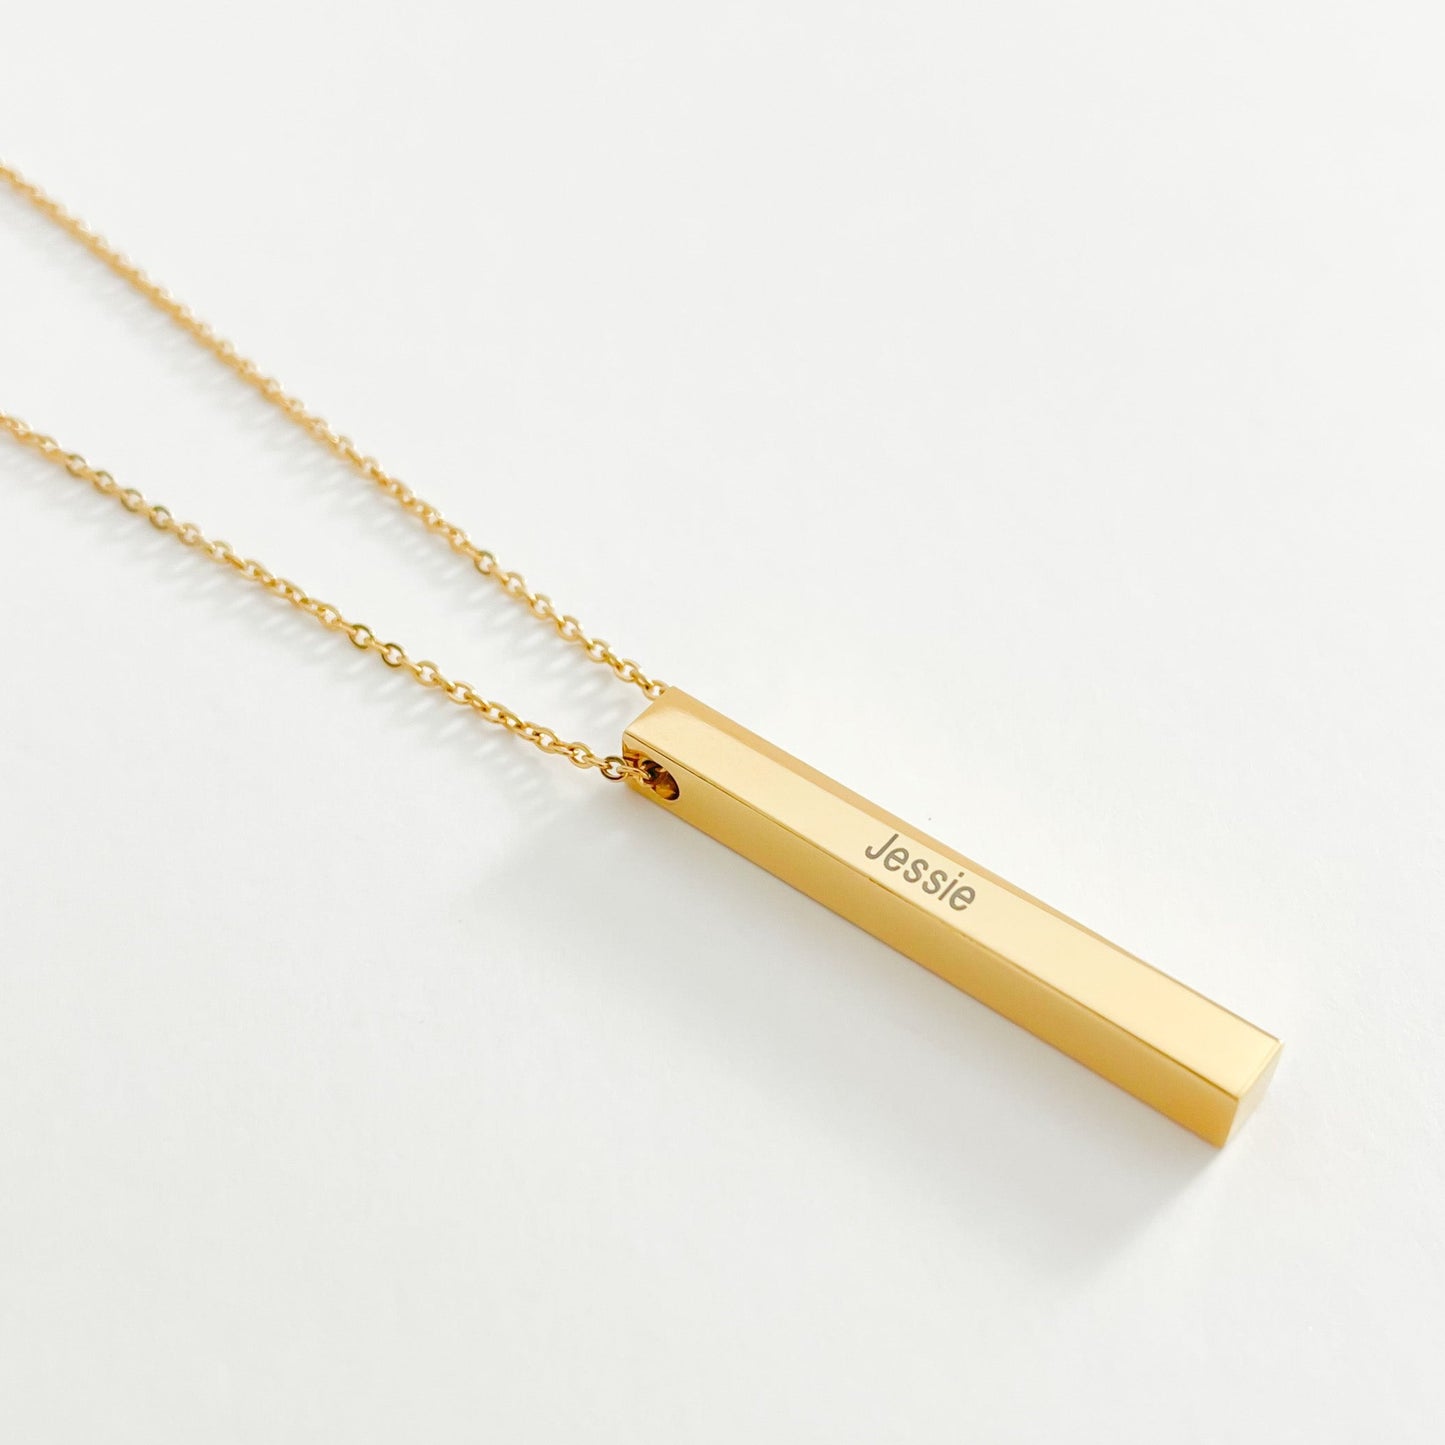 PERSONALISED ENGRAVABLE BAR NAME NECKLACE